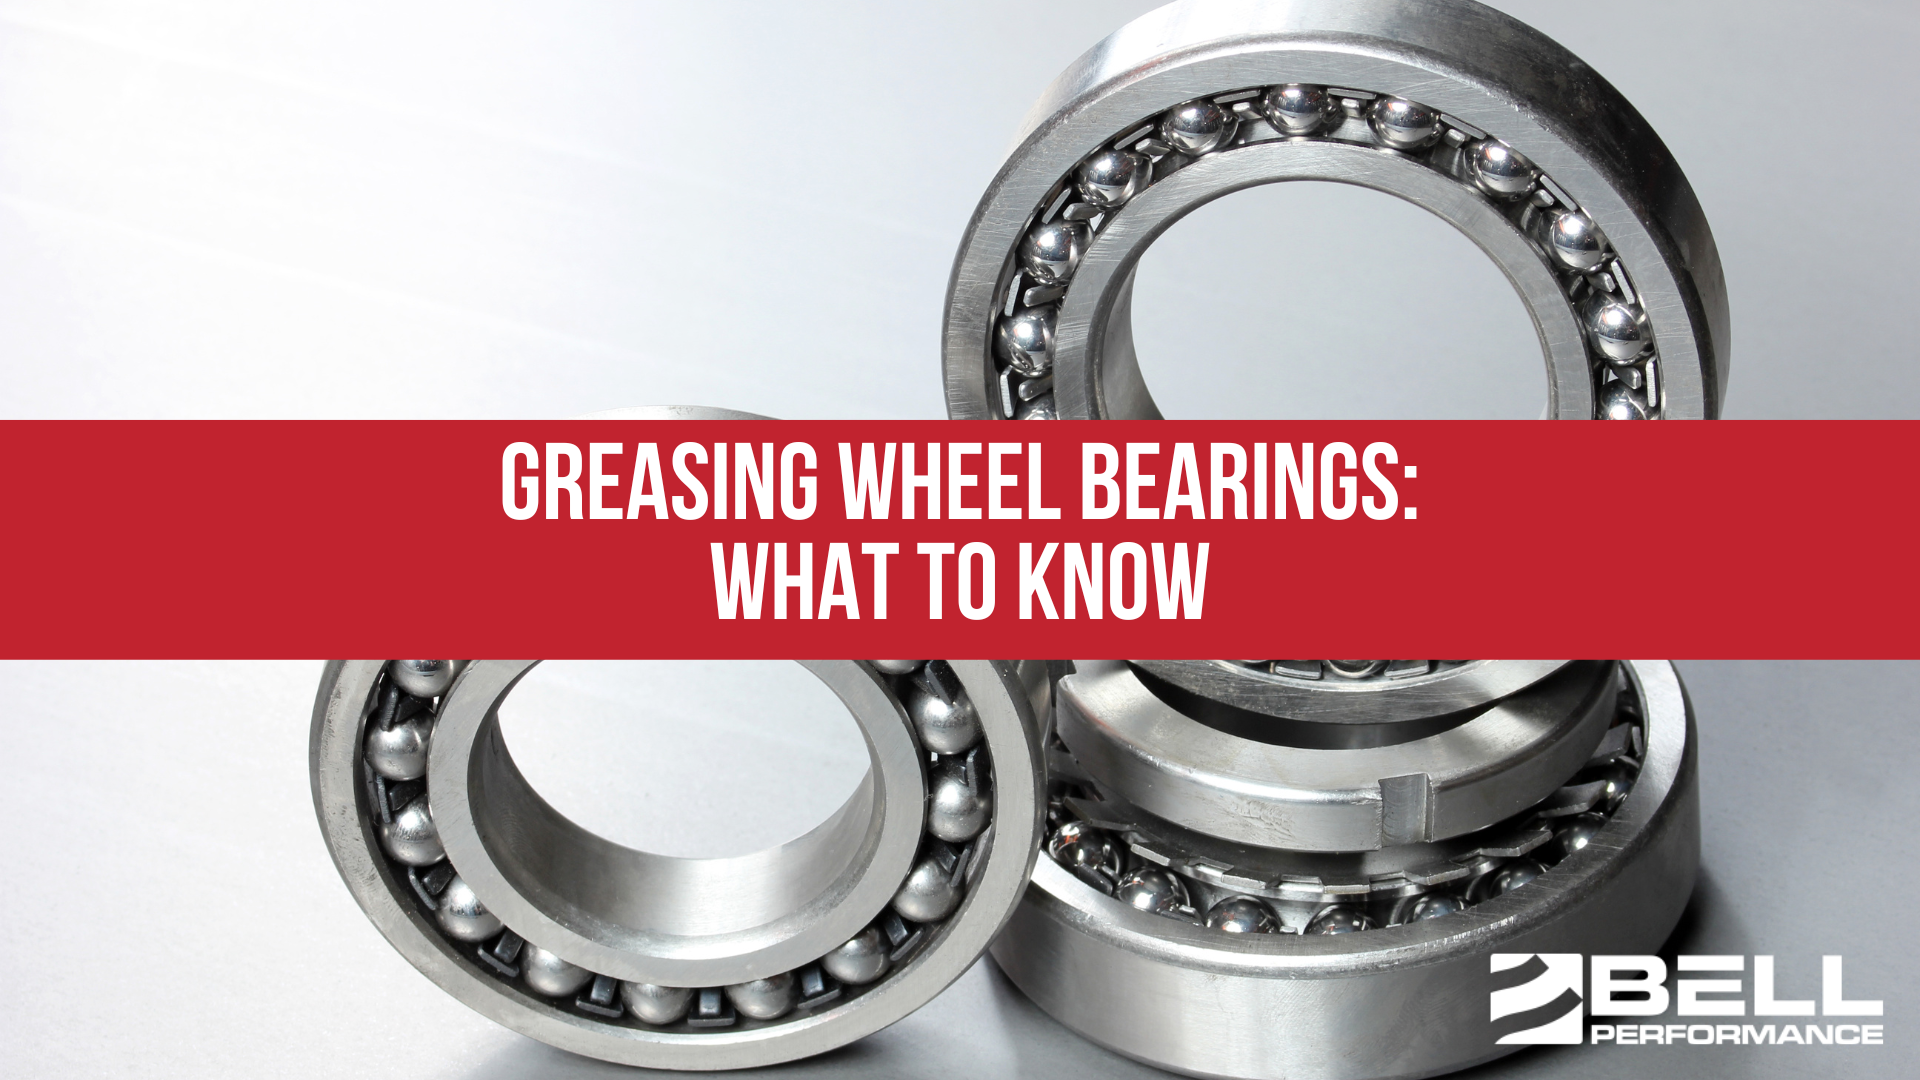 Greasing Wheel Bearings: What To Know